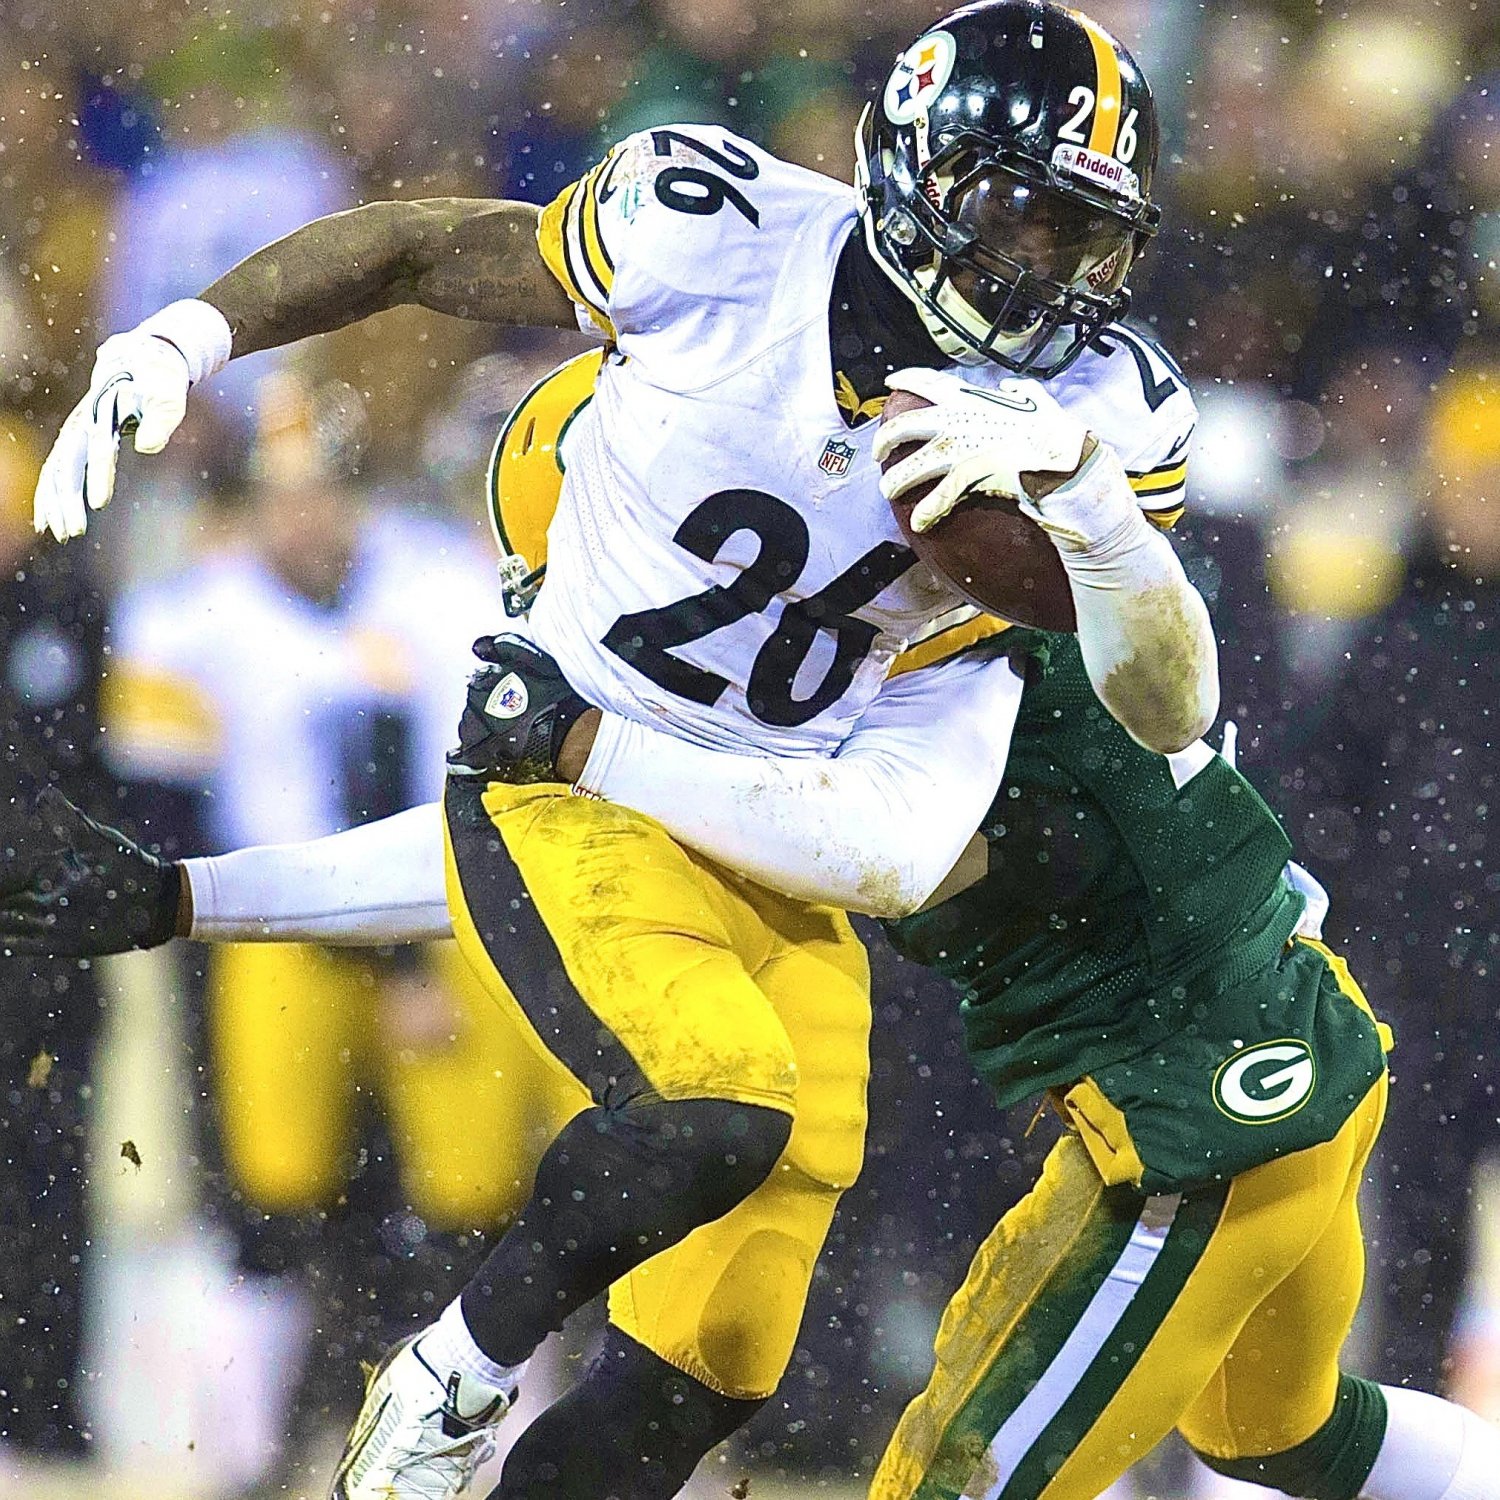 Pittsburgh Steelers vs. Green Bay Packers Live Score, Highlights and